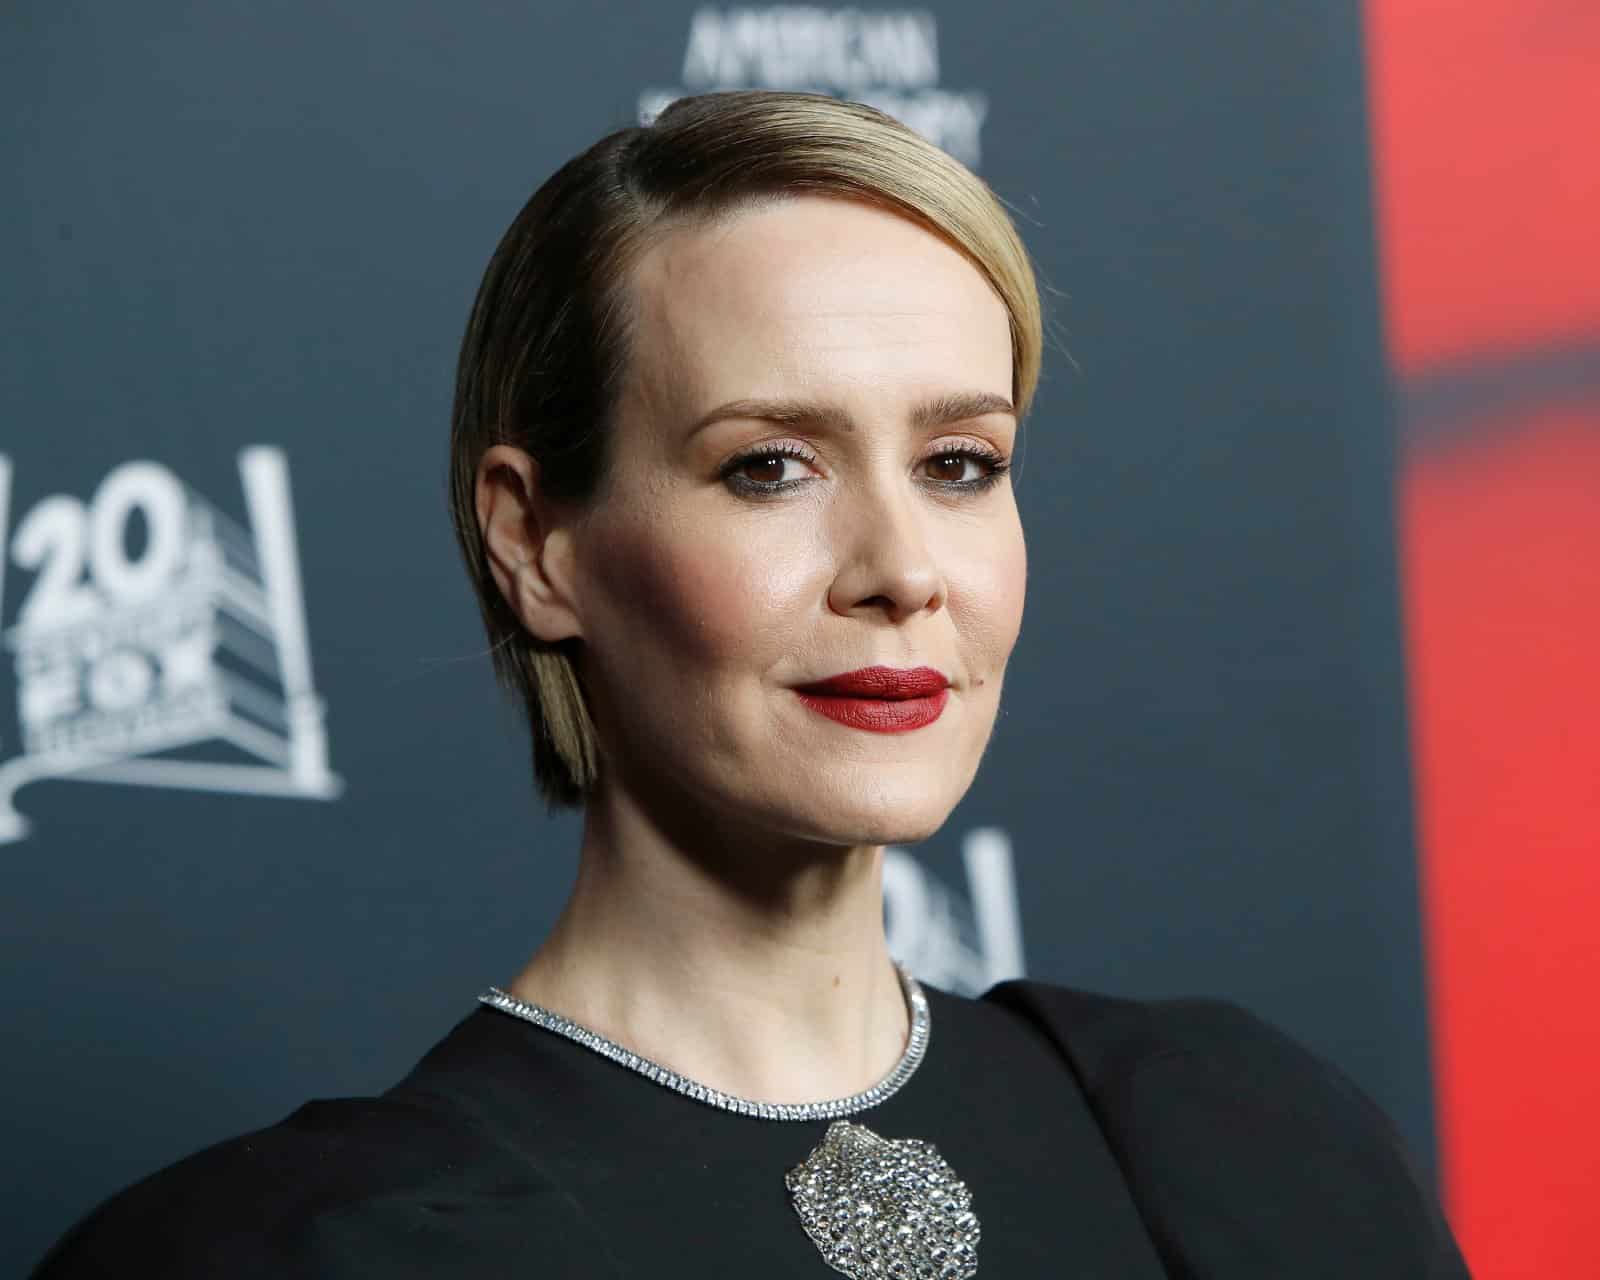 Image Credit: Shutterstock / Kathy Hutchins <p><span>During her acceptance speech at the Television Critics Association Awards in 2017, Sarah Paulson emphasized the importance of LGBTQ+ storytelling in media and her pride in playing diverse roles that highlight LGBTQ+ experiences.</span></p>